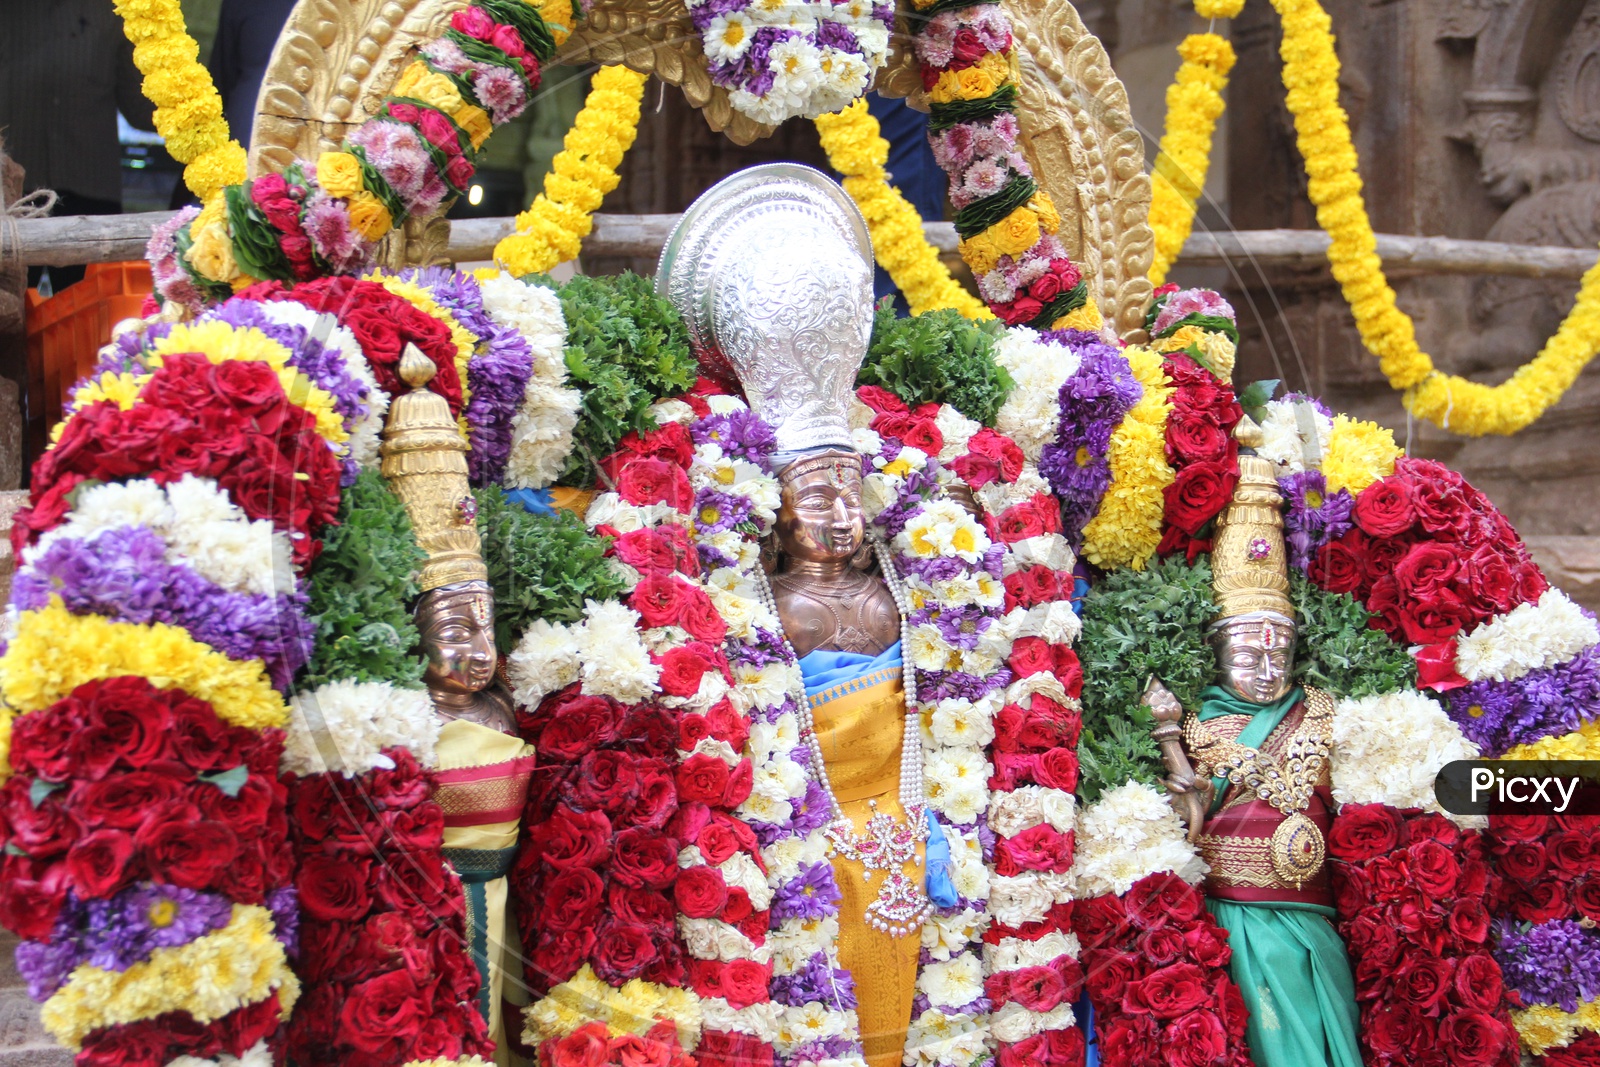 Indian Hindu Goddess decorated with flowers and garlands